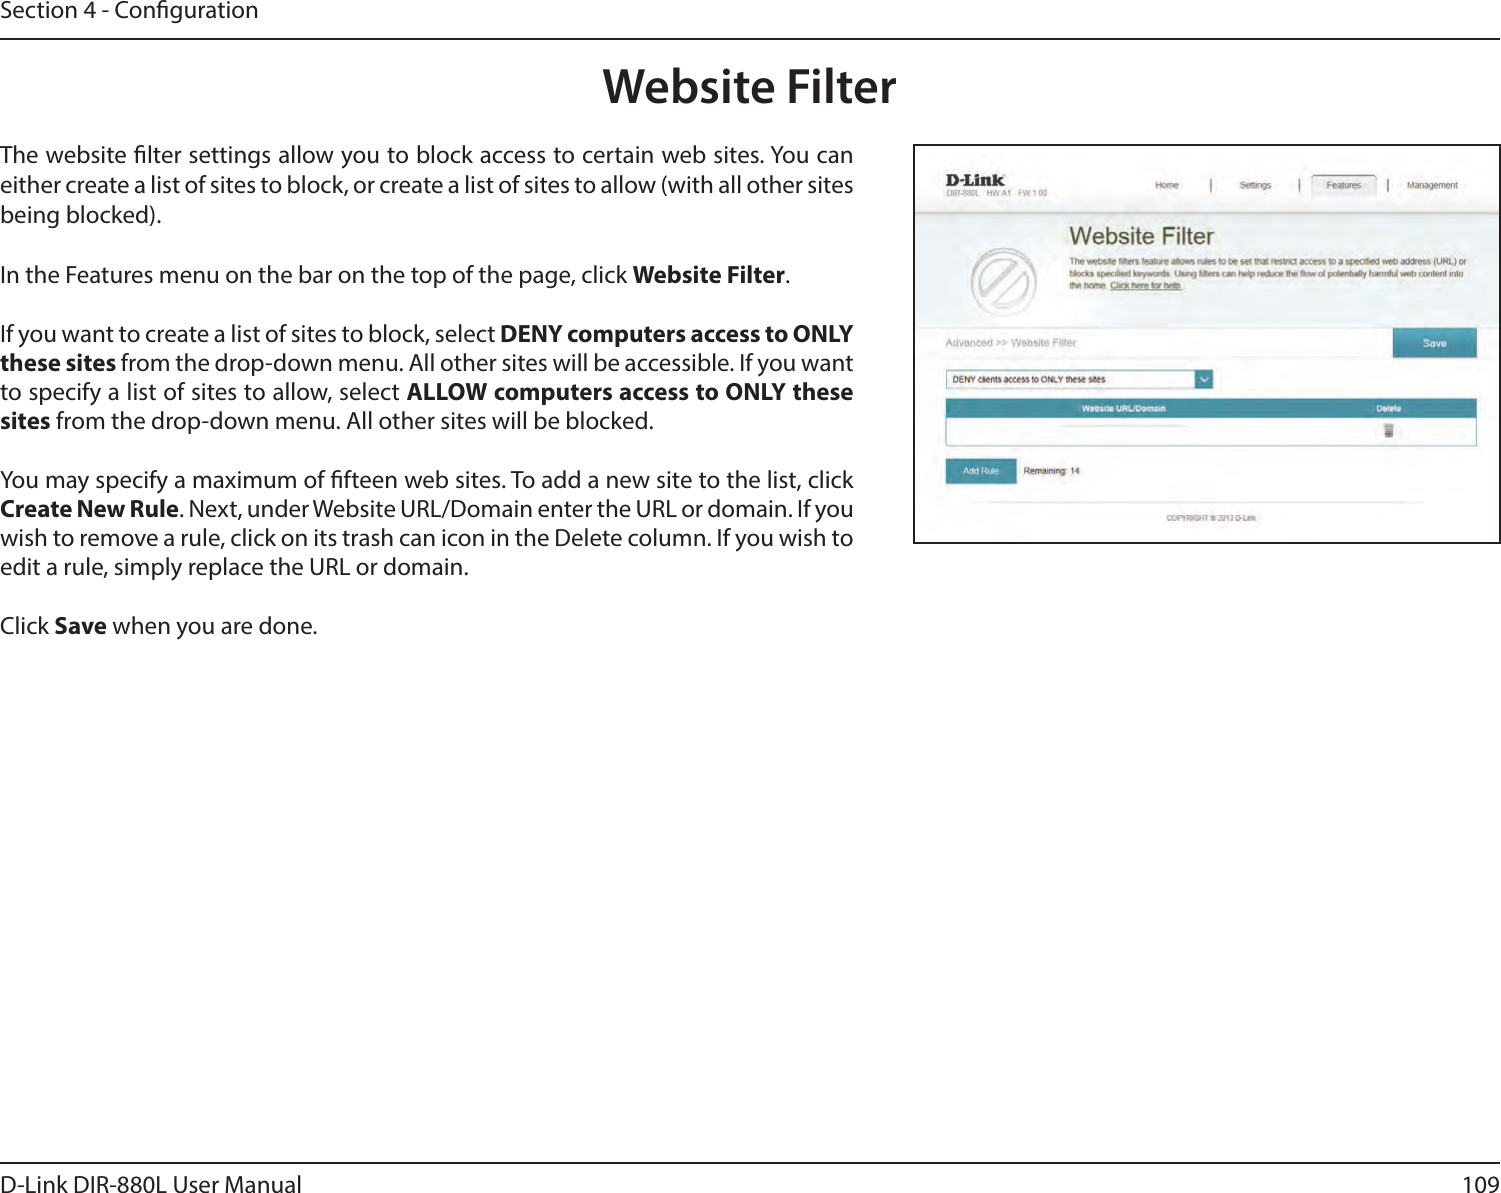 109D-Link DIR-880L User ManualSection 4 - CongurationWebsite FilterThe website lter settings allow you to block access to certain web sites. You can either create a list of sites to block, or create a list of sites to allow (with all other sites being blocked).In the Features menu on the bar on the top of the page, click Website Filter.If you want to create a list of sites to block, select DENY computers access to ONLY these sites from the drop-down menu. All other sites will be accessible. If you want to specify a list of sites to allow, select ALLOW computers access to ONLY these sites from the drop-down menu. All other sites will be blocked.You may specify a maximum of fteen web sites. To add a new site to the list, click Create New Rule. Next, under Website URL/Domain enter the URL or domain. If you wish to remove a rule, click on its trash can icon in the Delete column. If you wish to edit a rule, simply replace the URL or domain.Click Save when you are done.